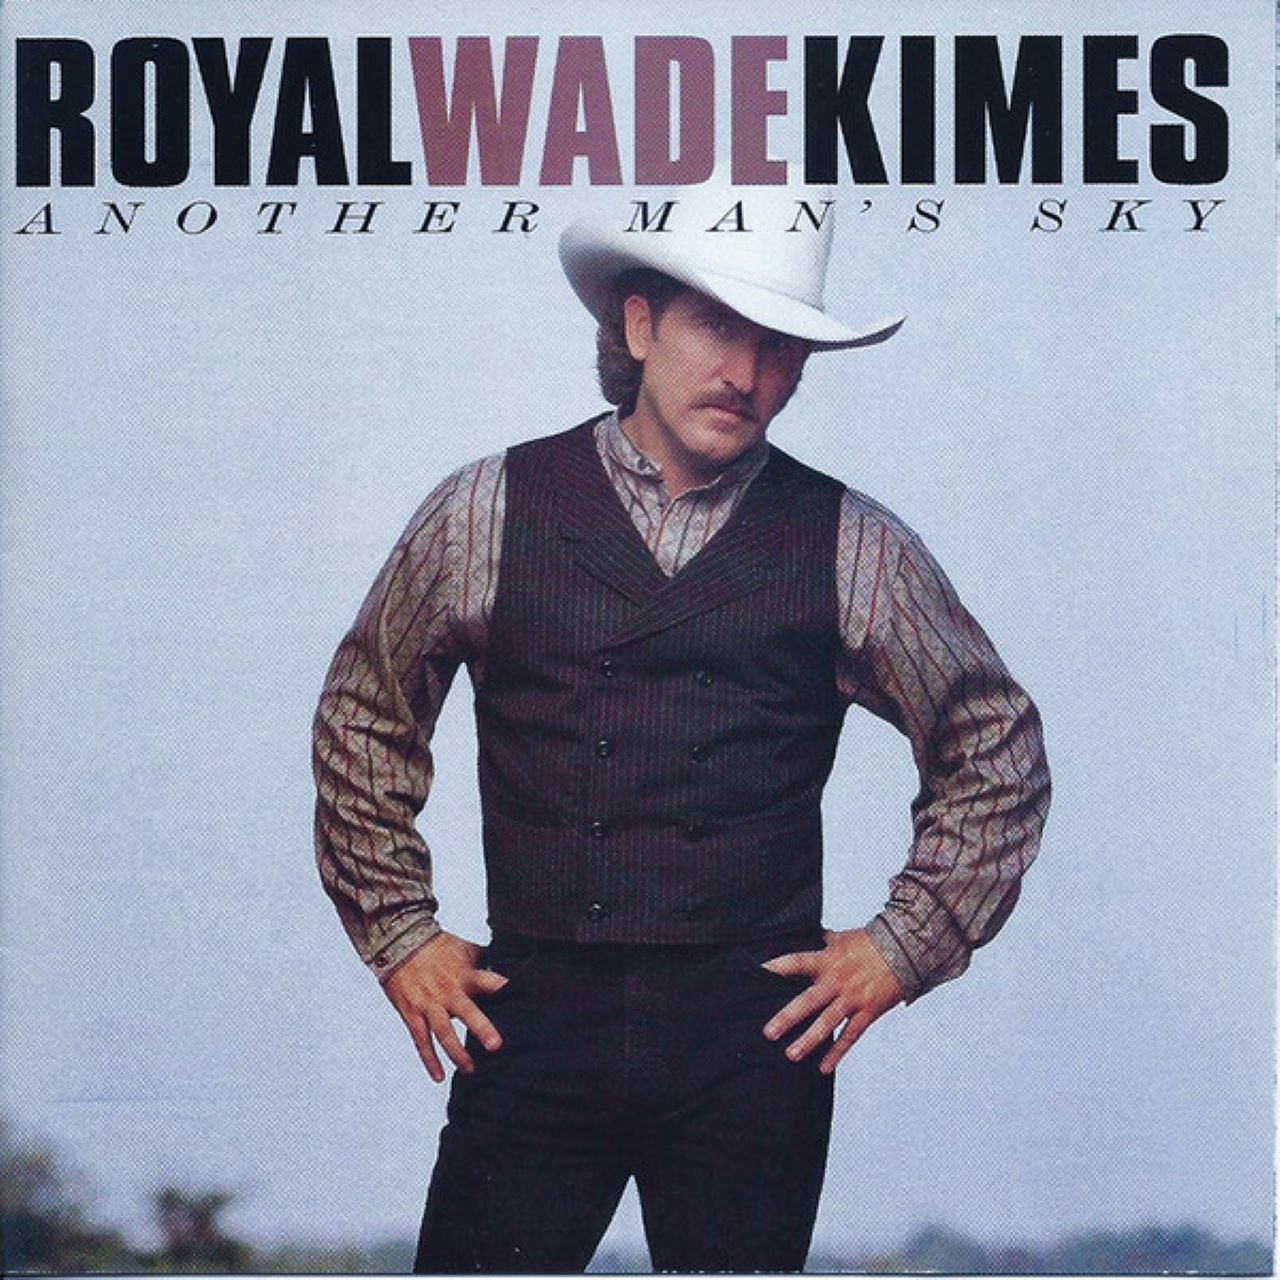 Royal Wade Kimes – Another Man's Sky cover album